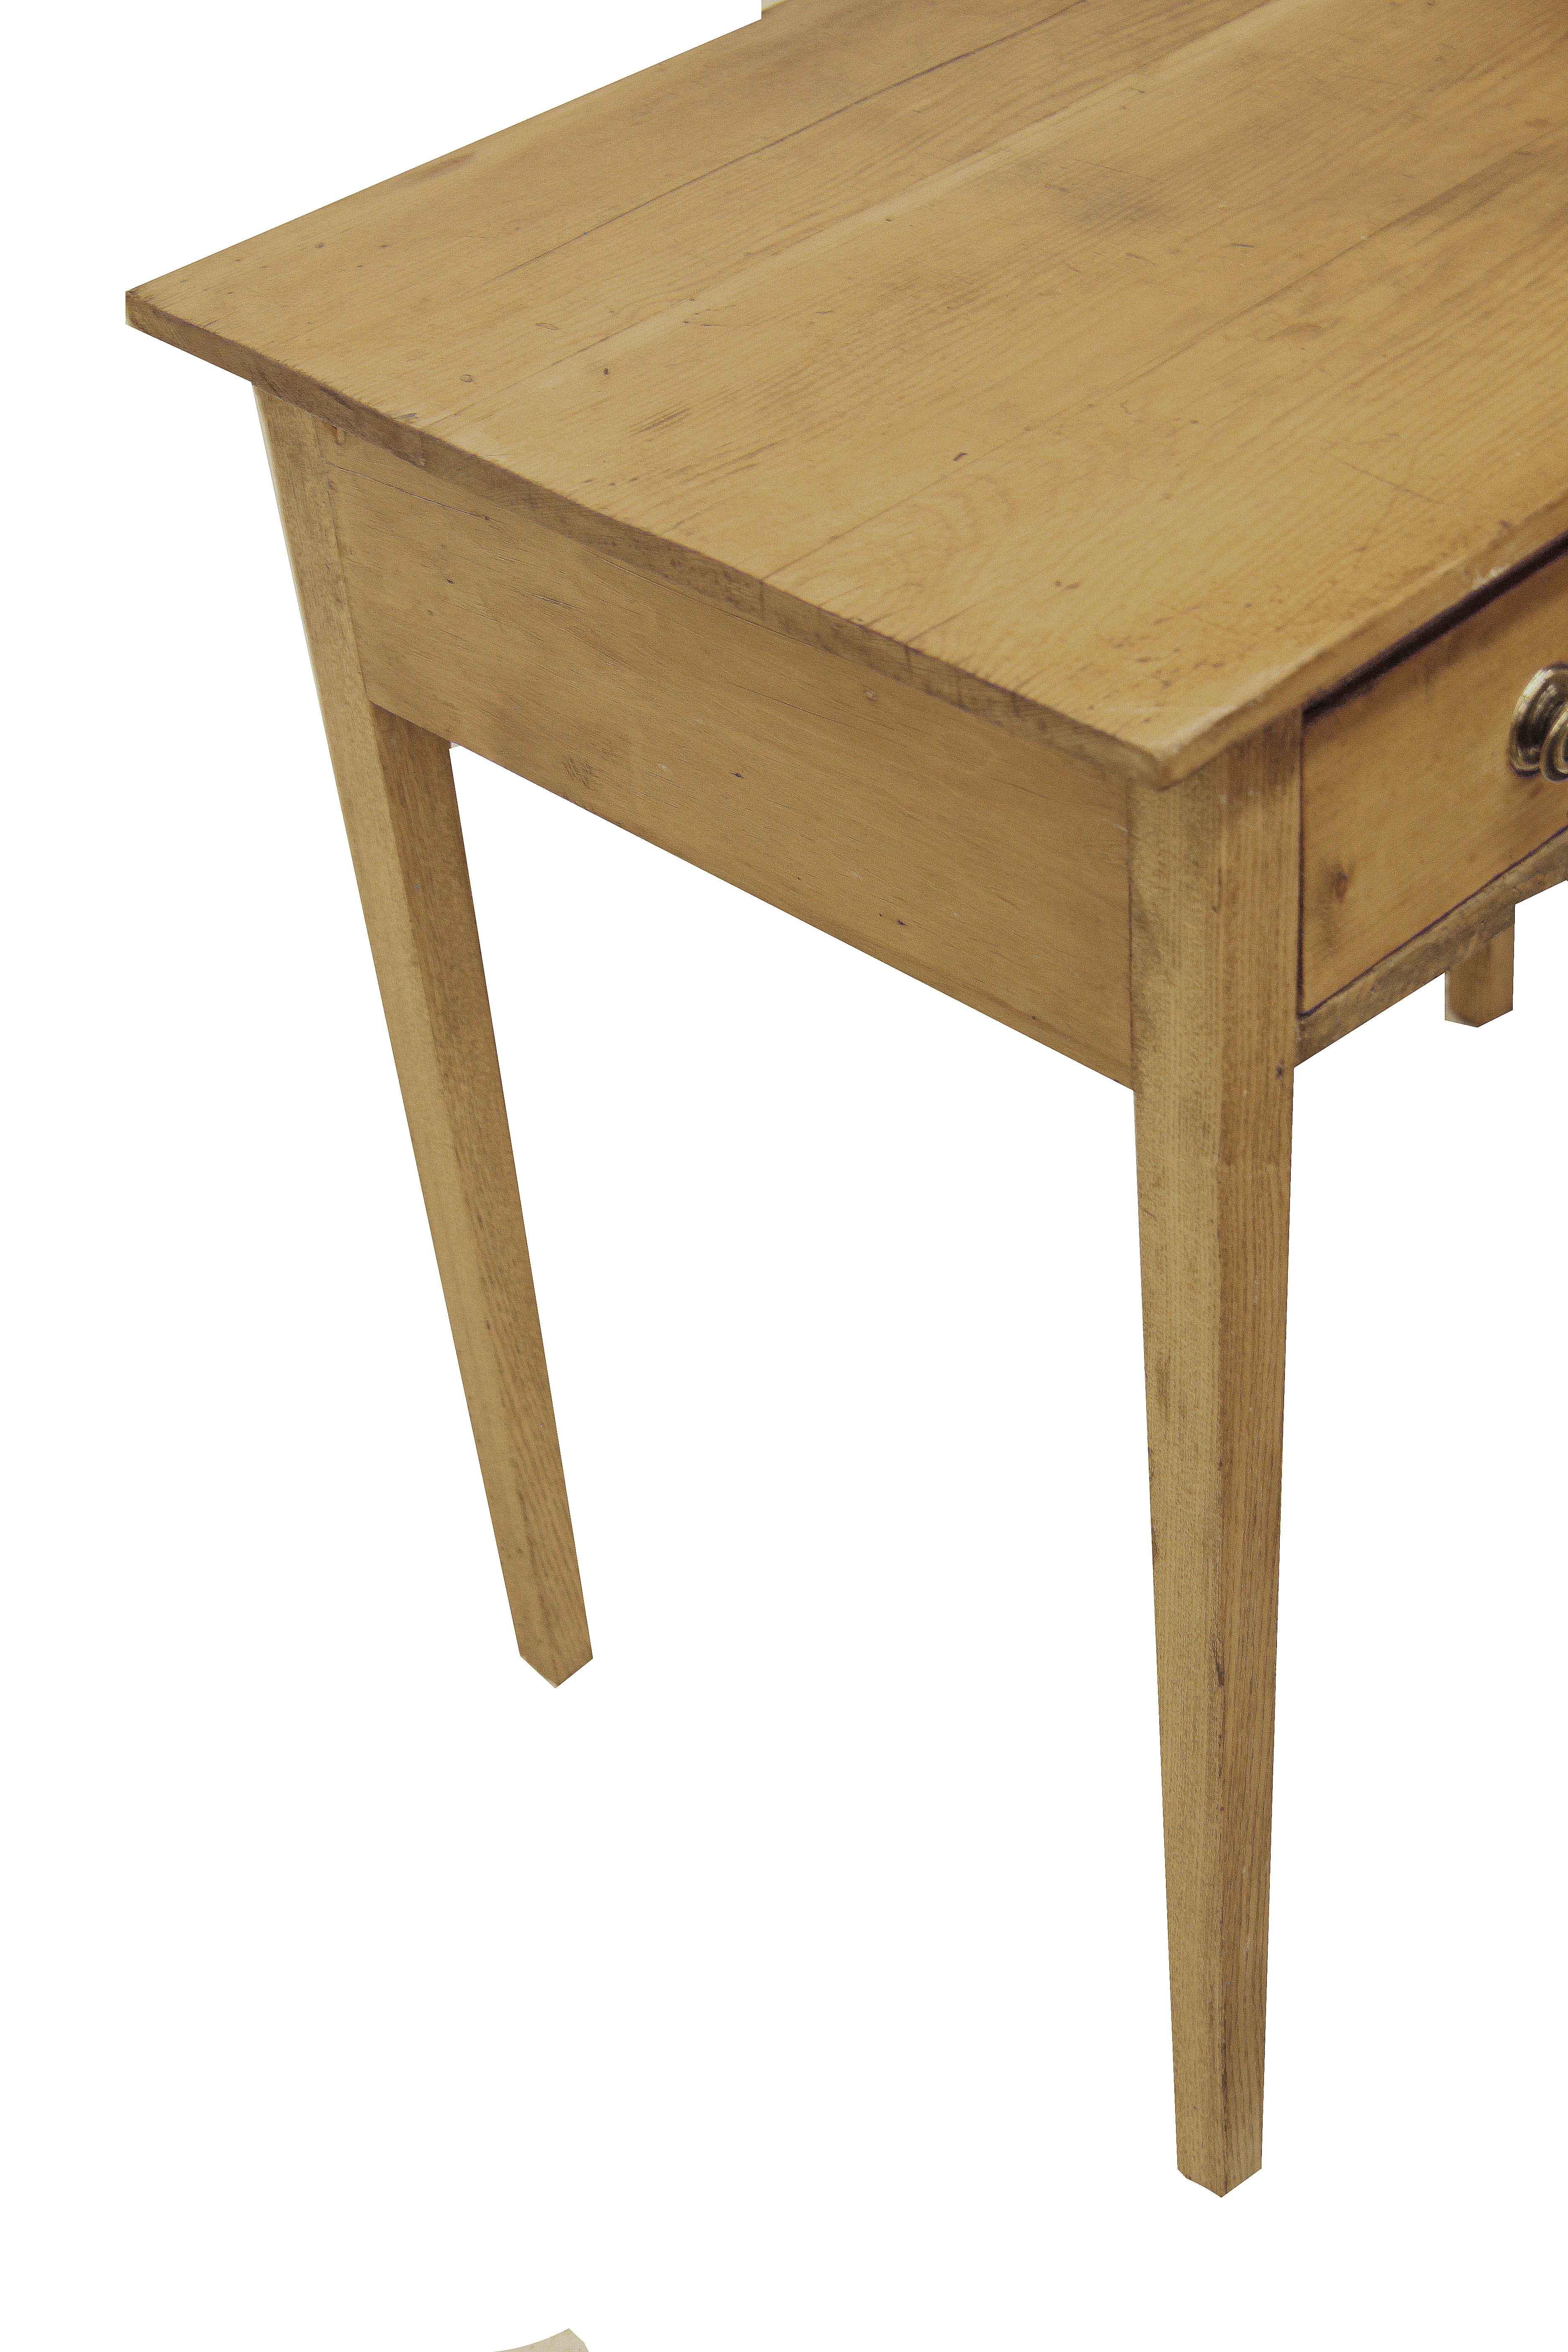 English pine one drawer side table,  this table has a wax finish with nice color and patina.  The single drawer retains the original brass knobs,  it has a small repair on the right hand lower corner of the drawer ( see photo)  The legs are nicely